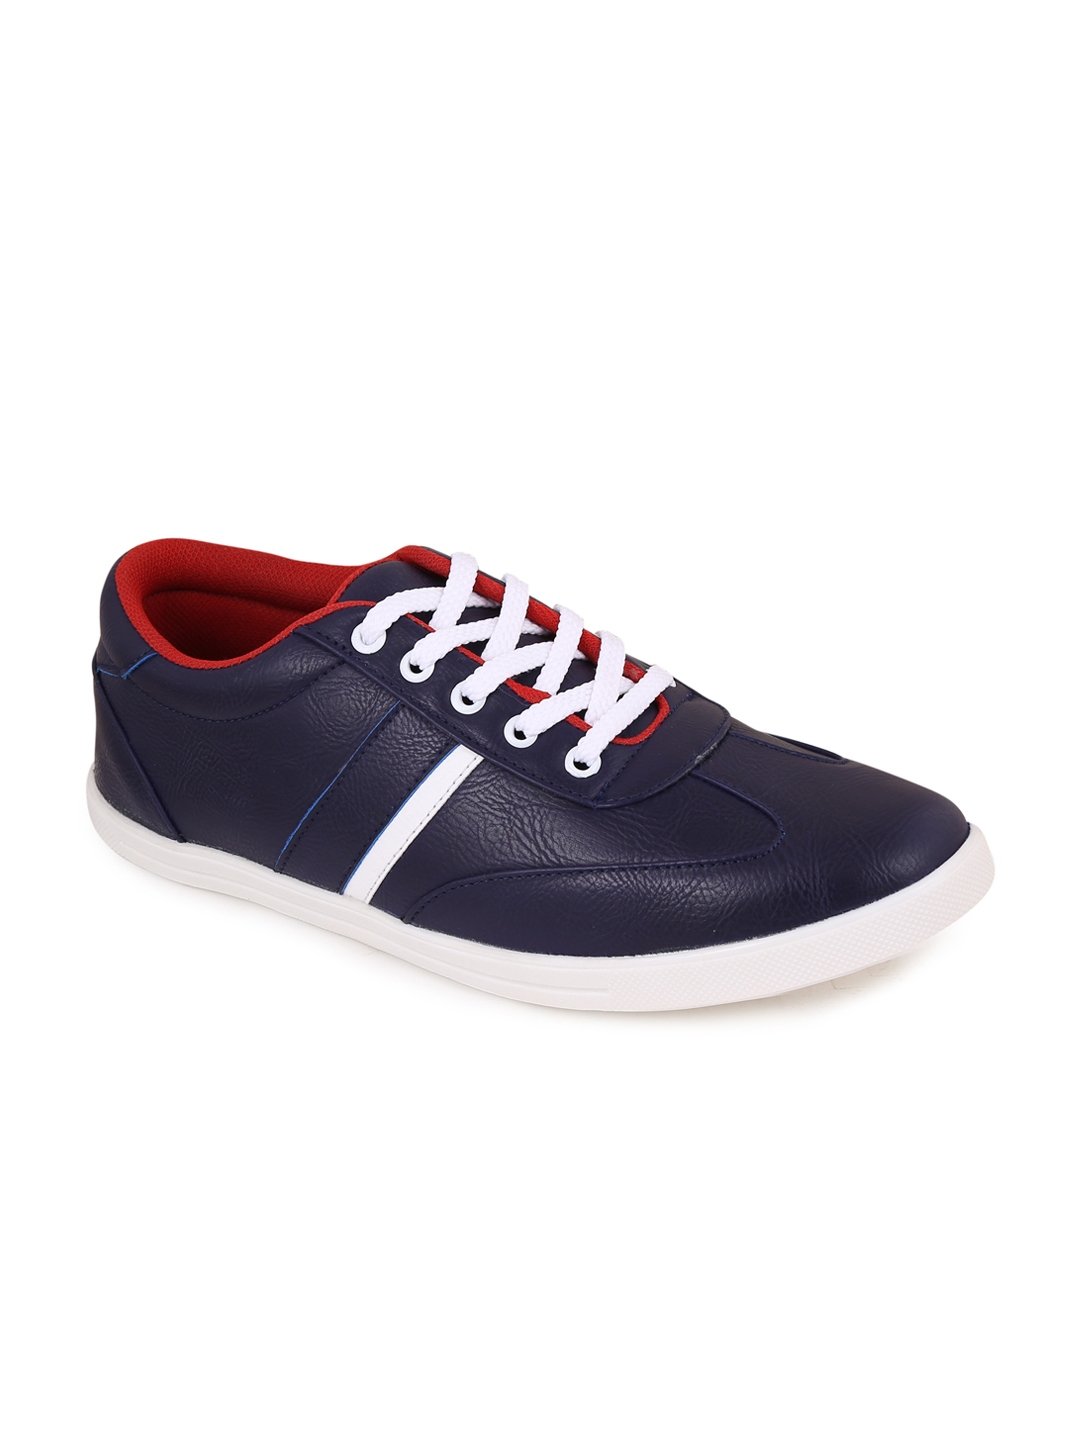 Buy Quarks Men Blue Casual Shoes - Casual Shoes for Men 1318916 | Myntra